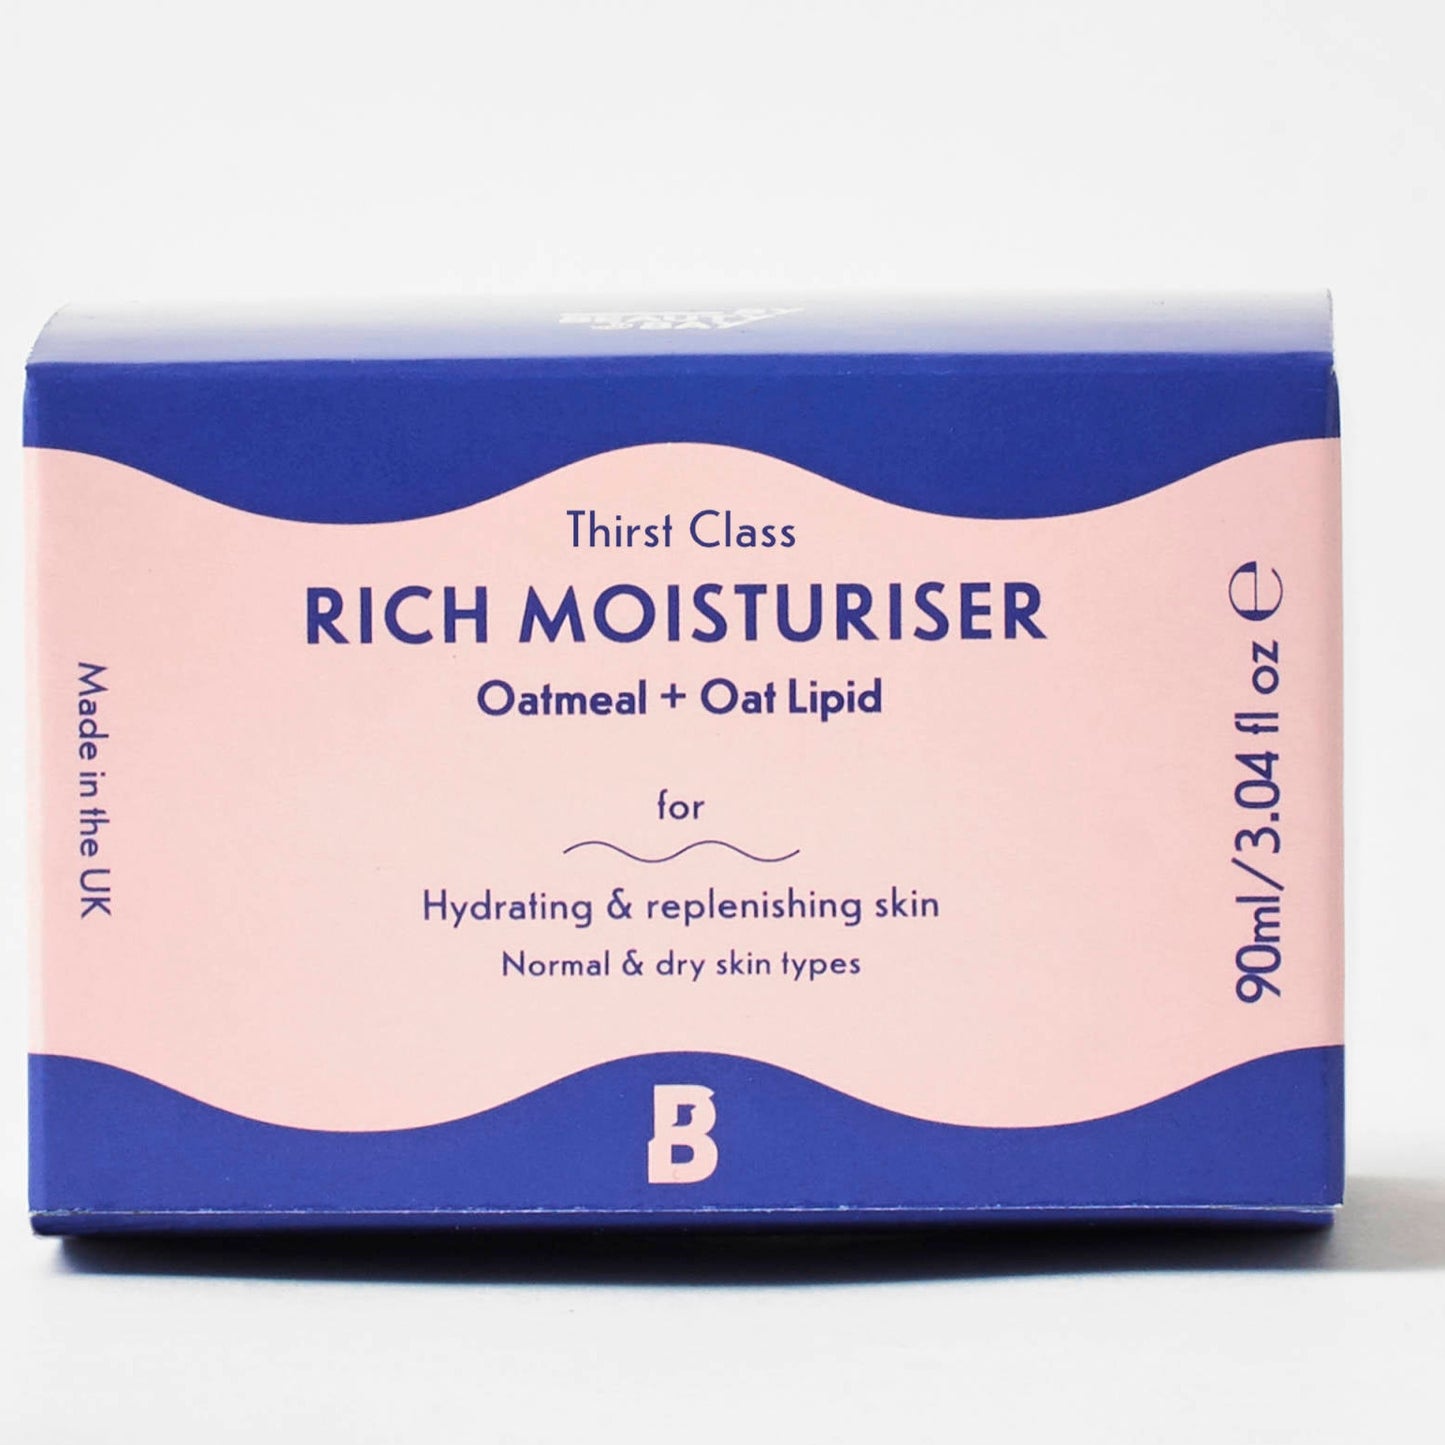 Thirst Class Rich Moisturiser with Oatmeal and Oat Lipid